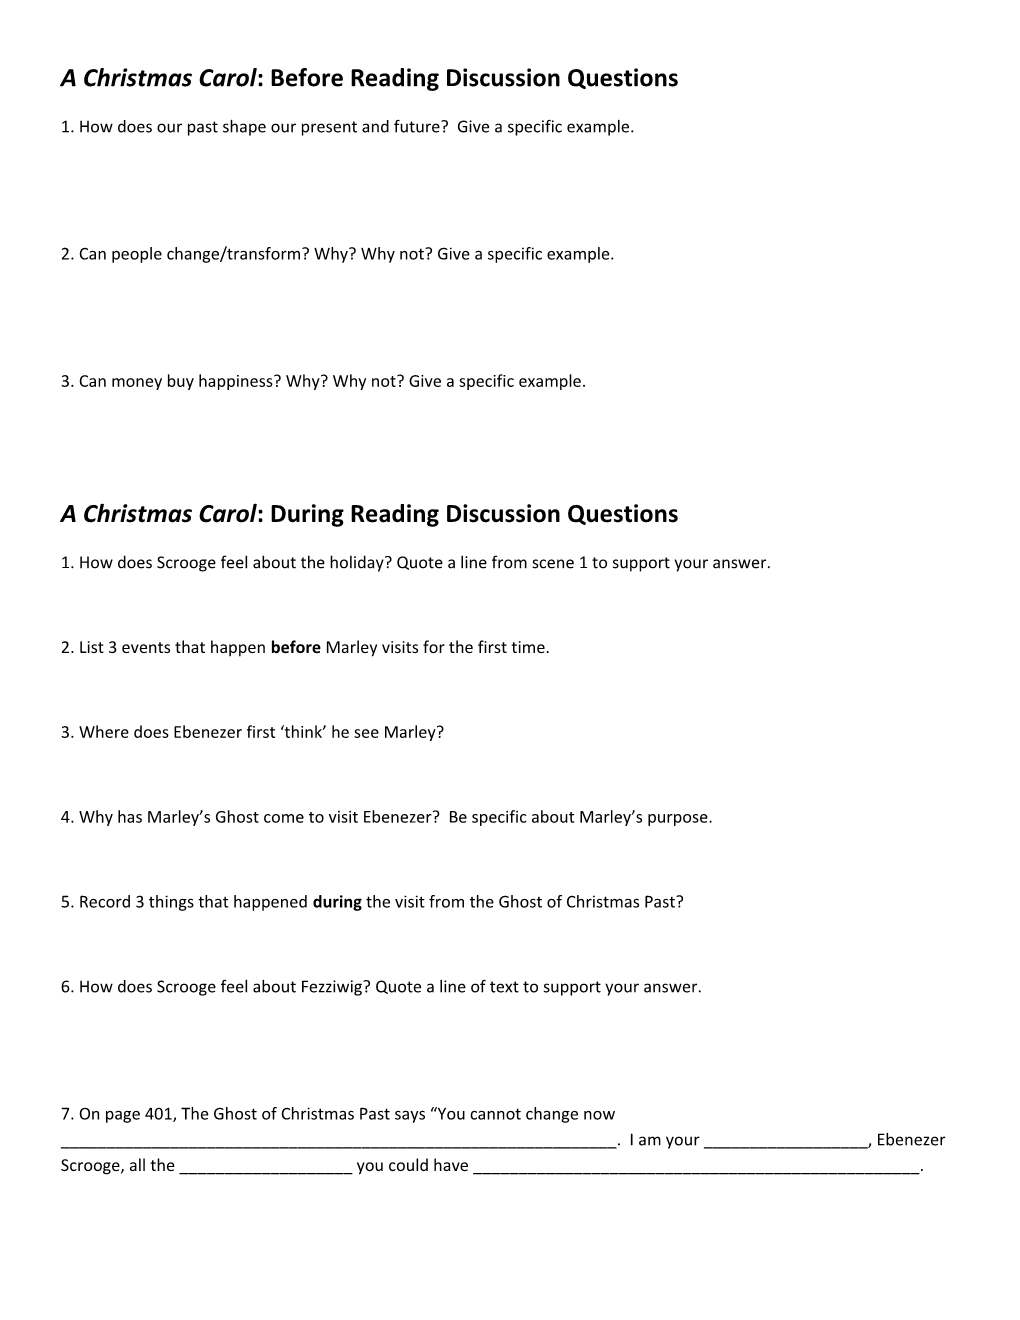 A Christmas Carol: Before Reading Discussion Questions